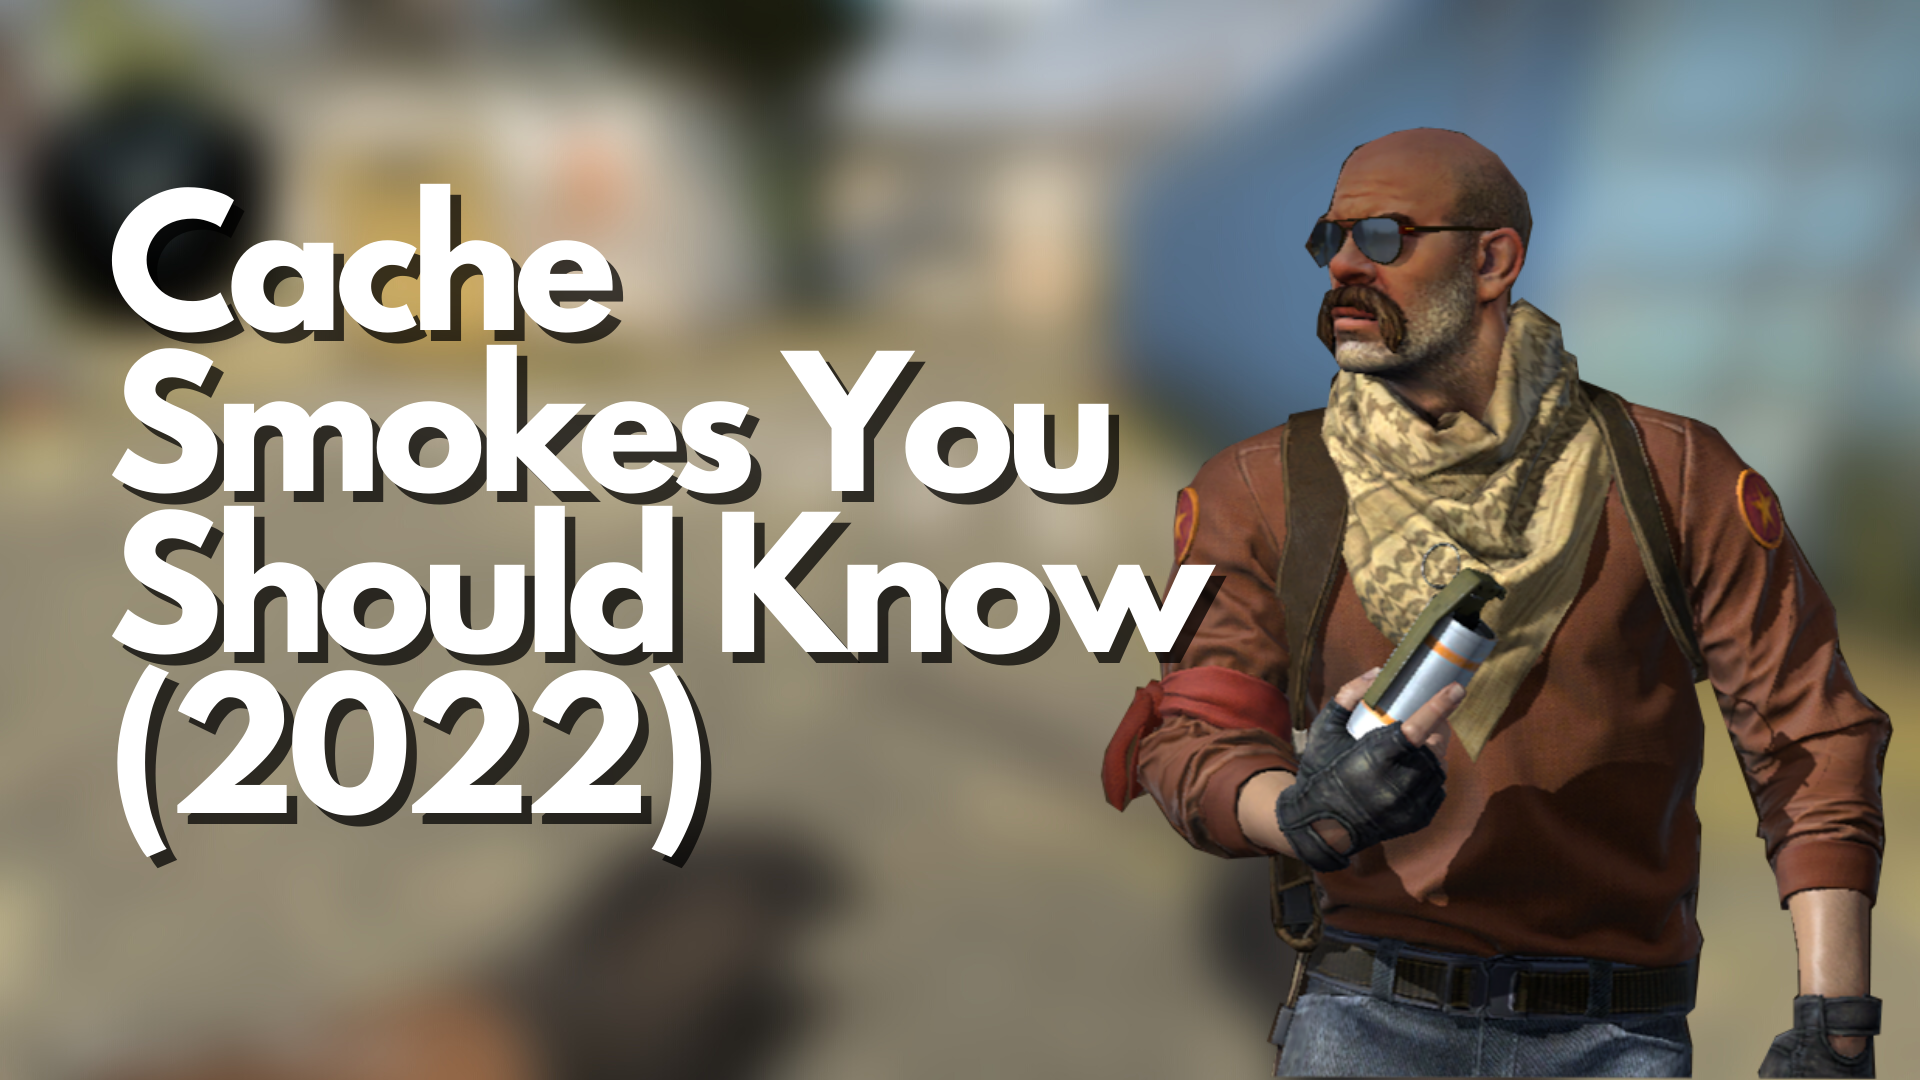 T-side Cache Smokes You Should Know (2022)